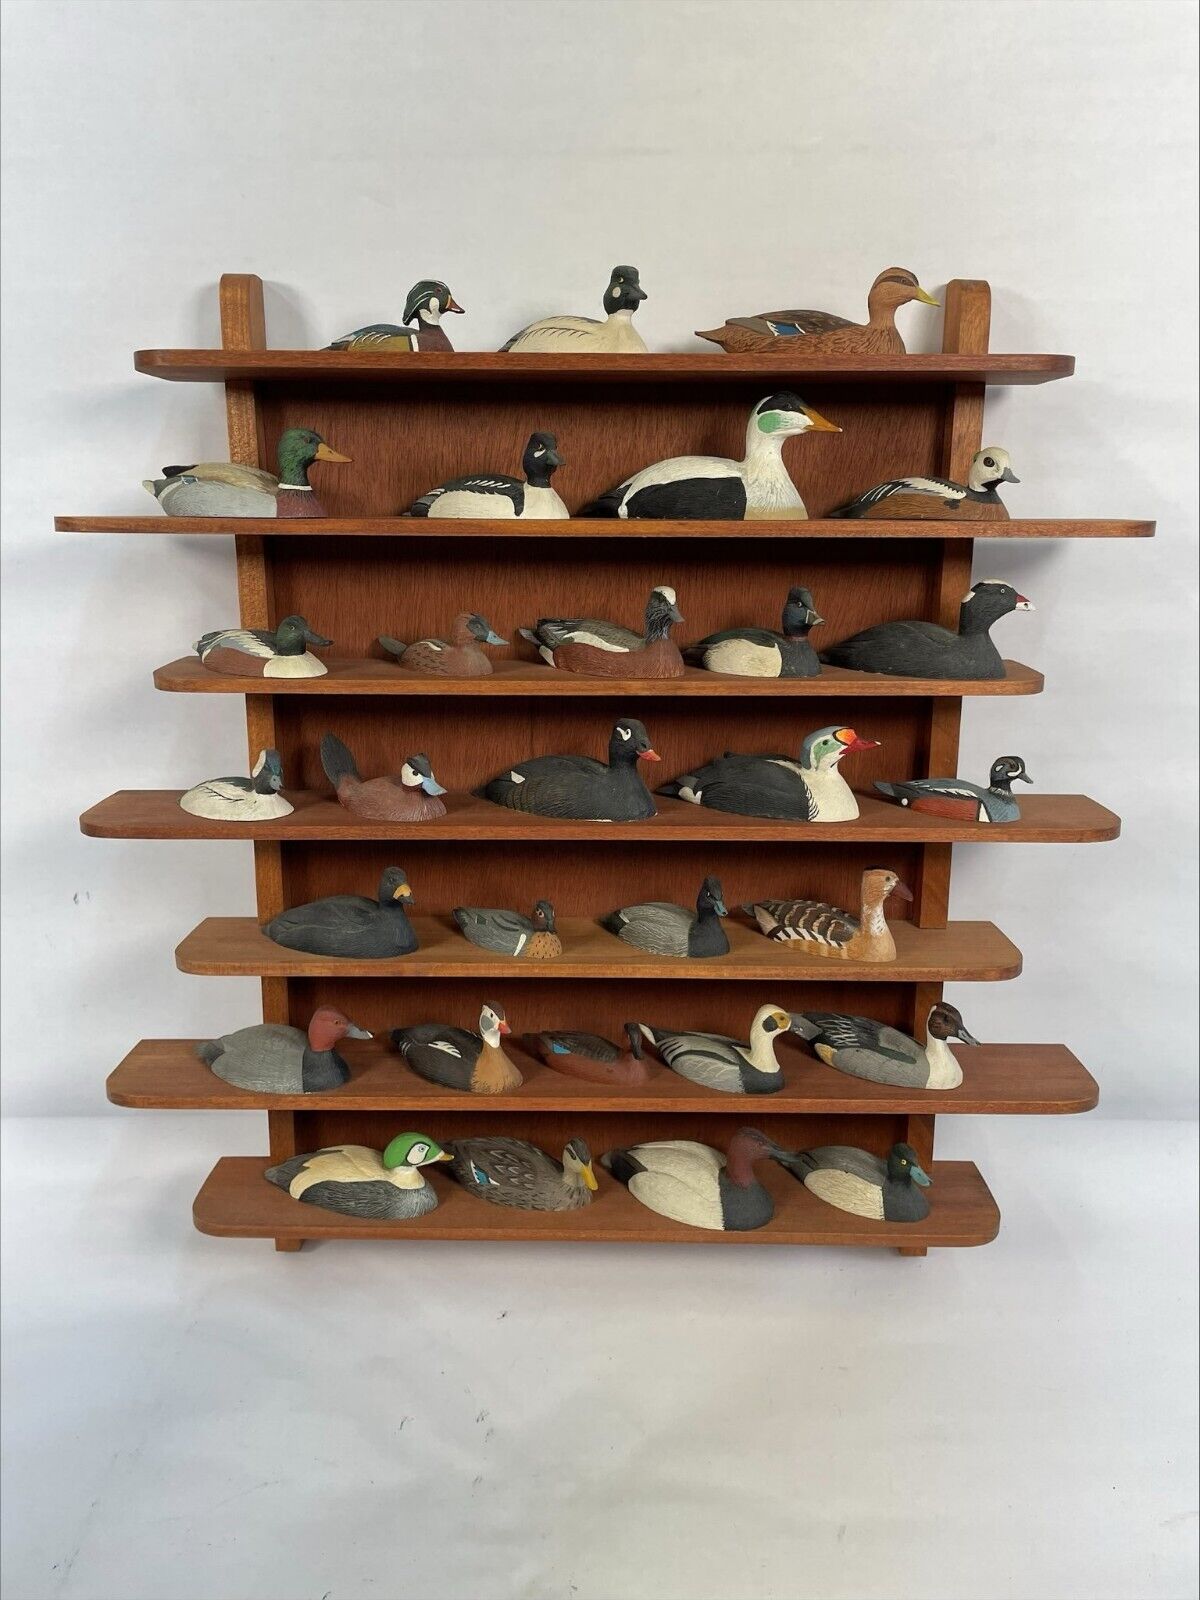 30 pcs Great North American Miniature Franklin Mint Ducks with Wooden Rack